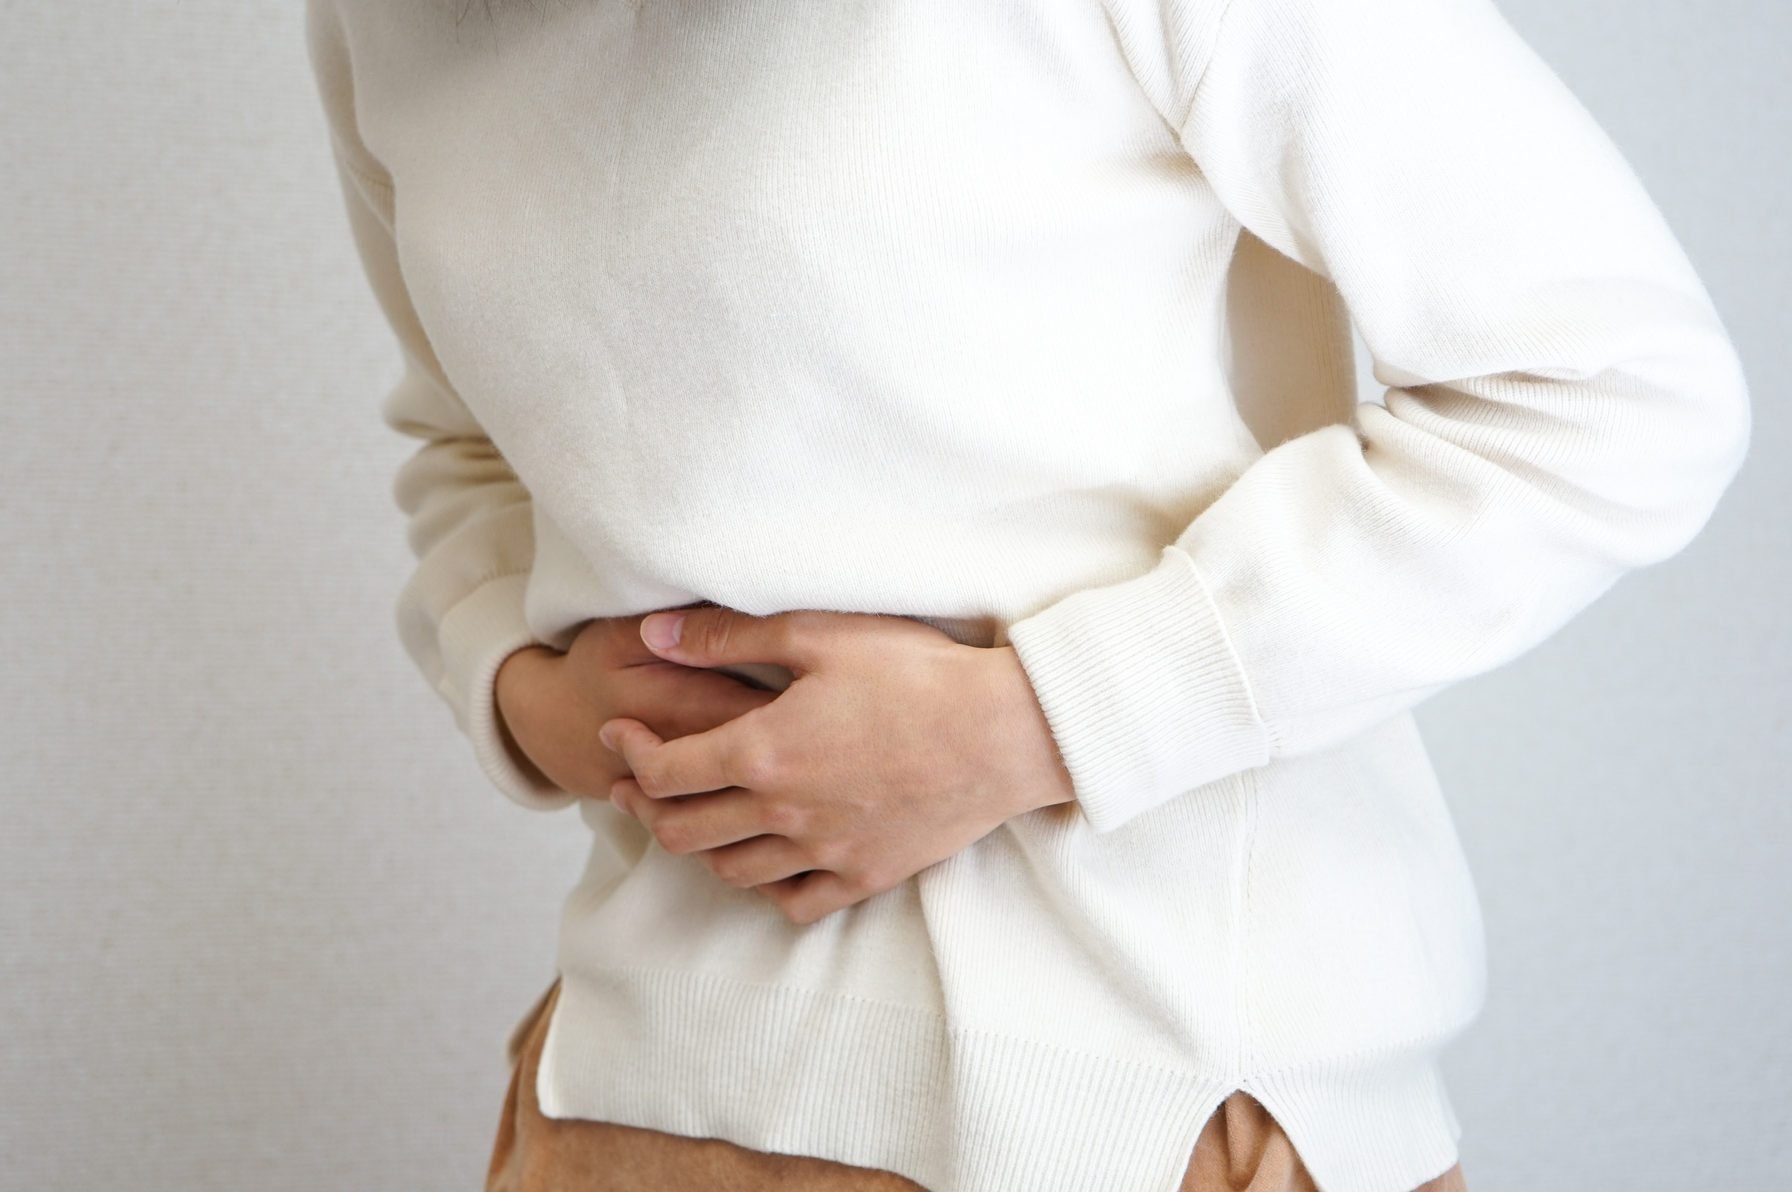 Period Pain Relief: 8 Unexpected Ways to Alleviate Cramps